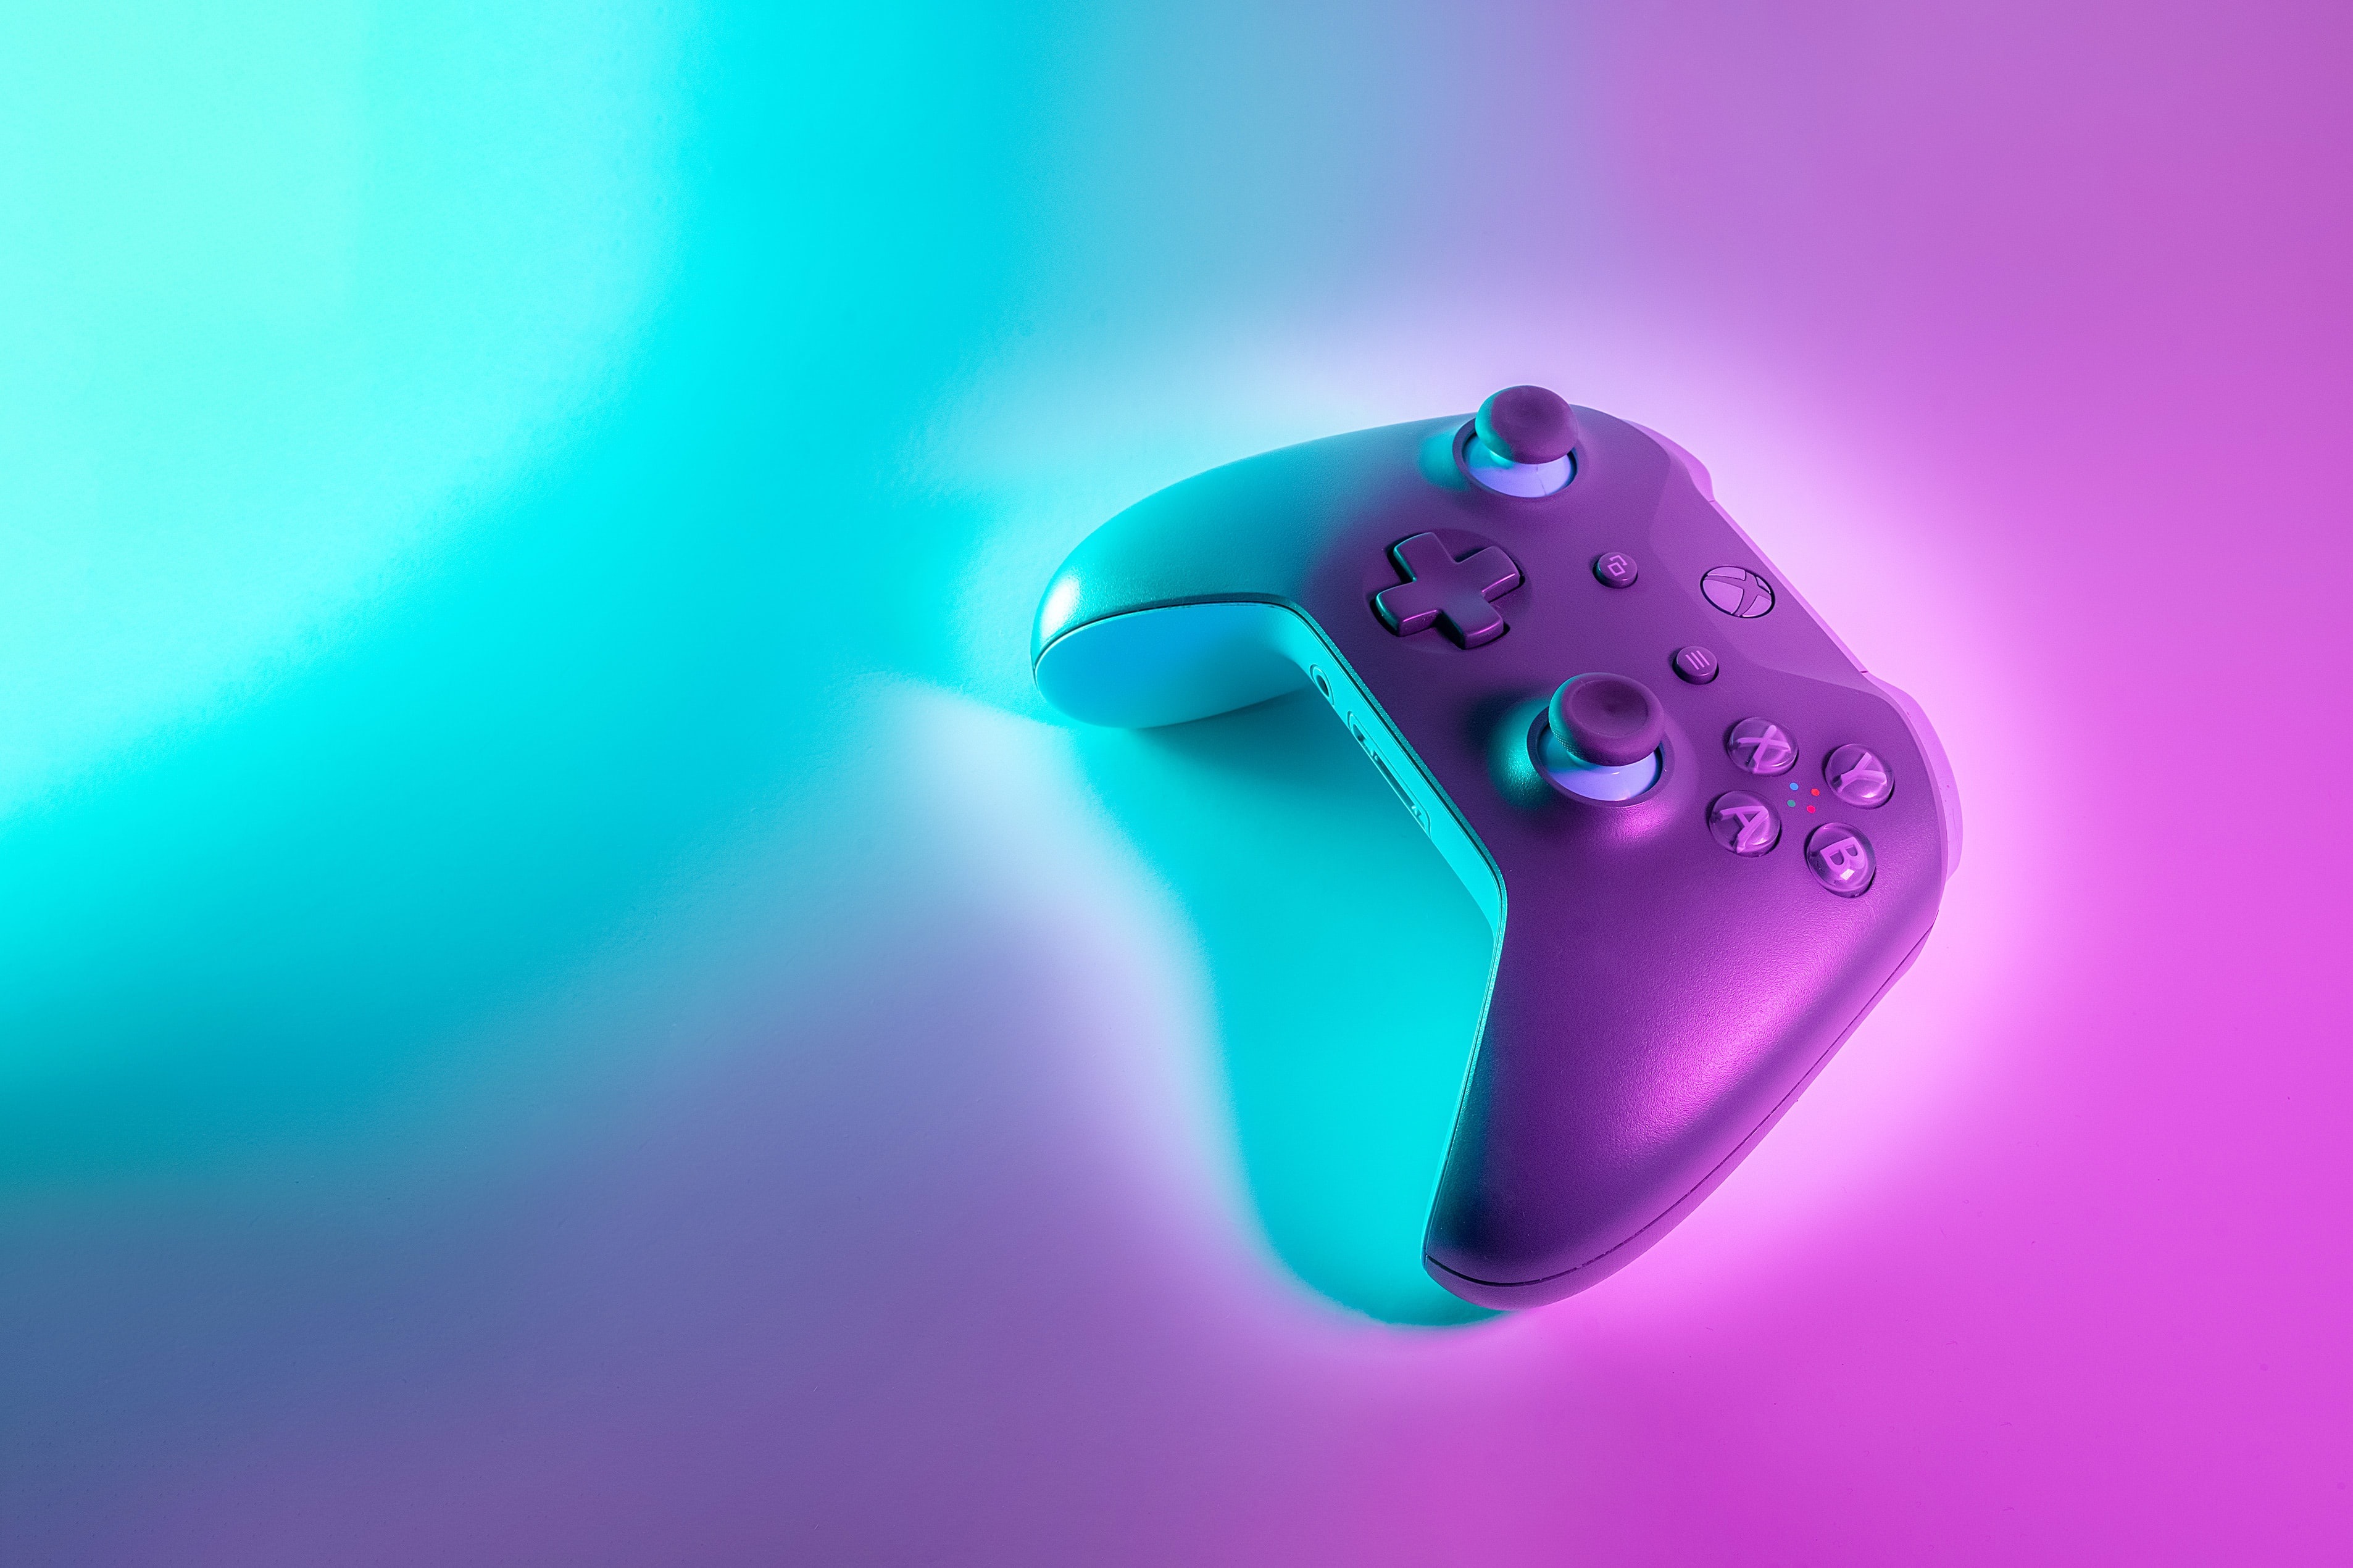 x-box controller on a cool teal and pink background